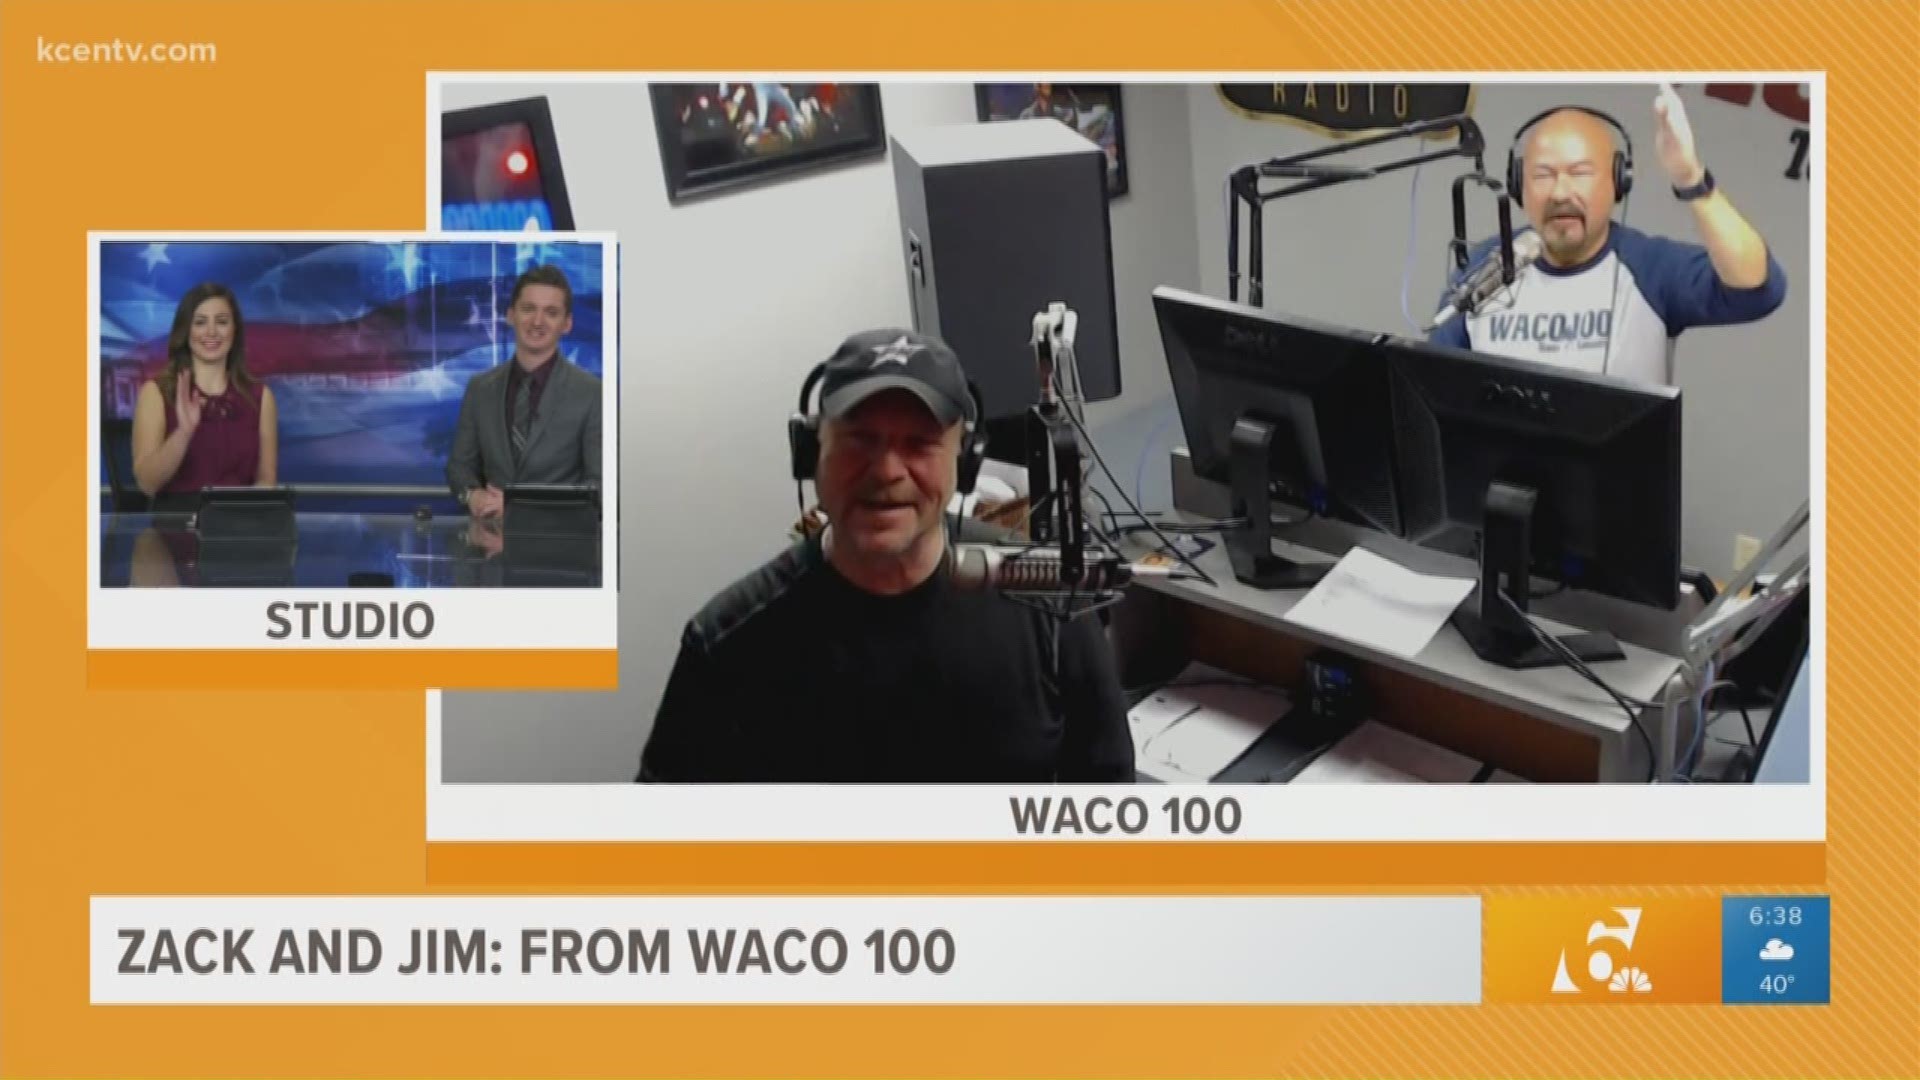 Zack & Jim from Waco 100 join Texas Today.